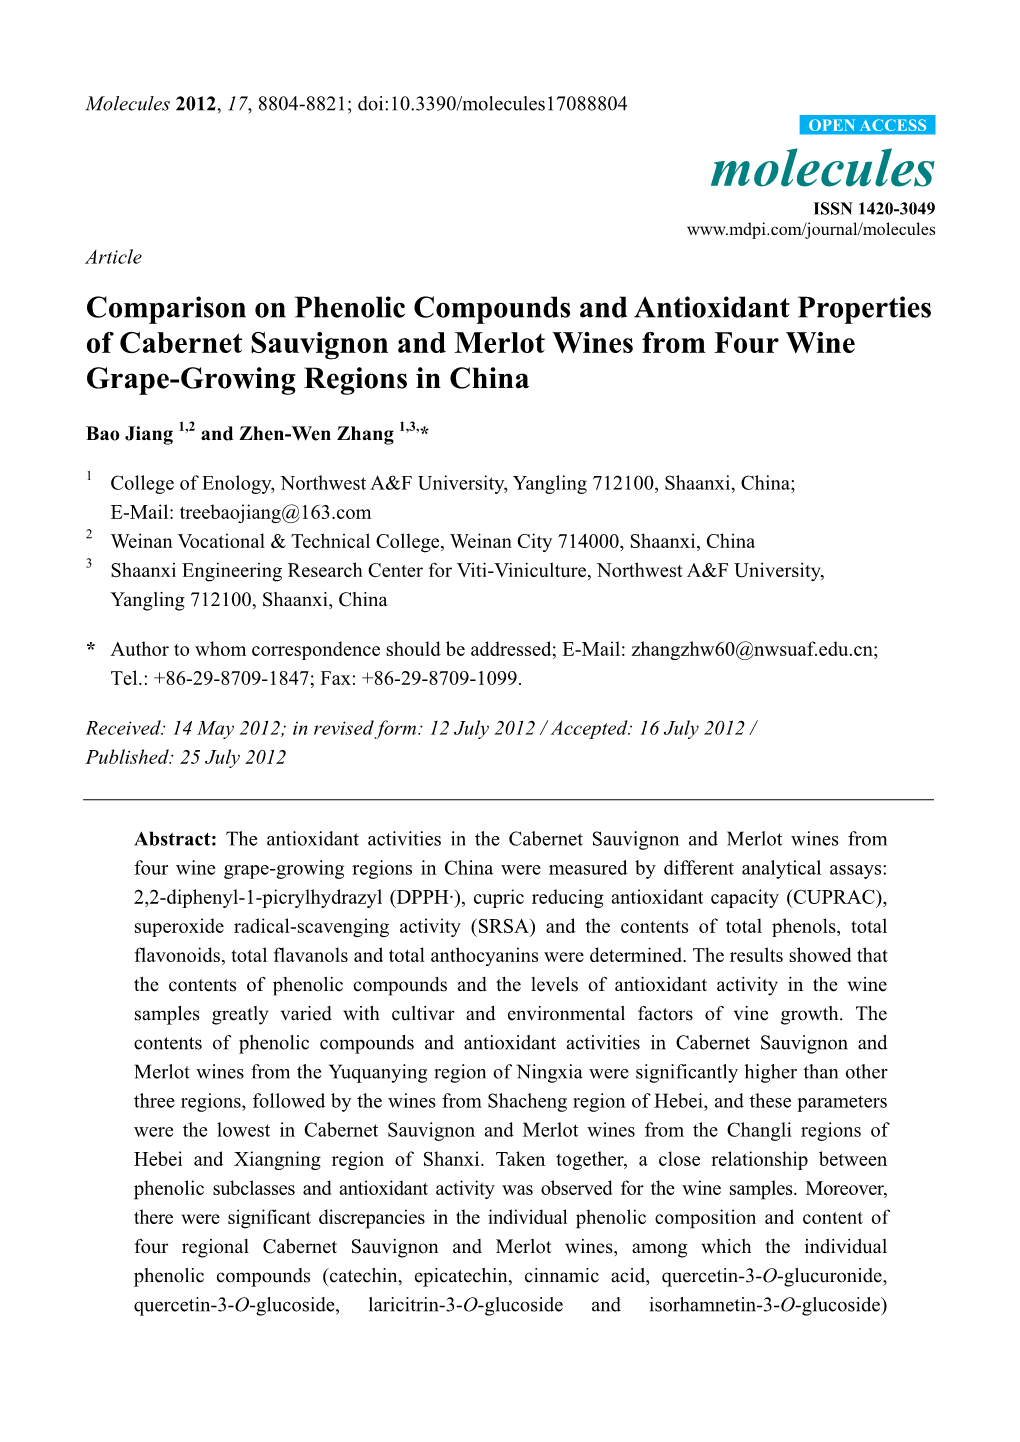 Comparison on Phenolic Compounds and Antioxidant Properties of Cabernet Sauvignon and Merlot Wines from Four Wine Grape-Growing Regions in China